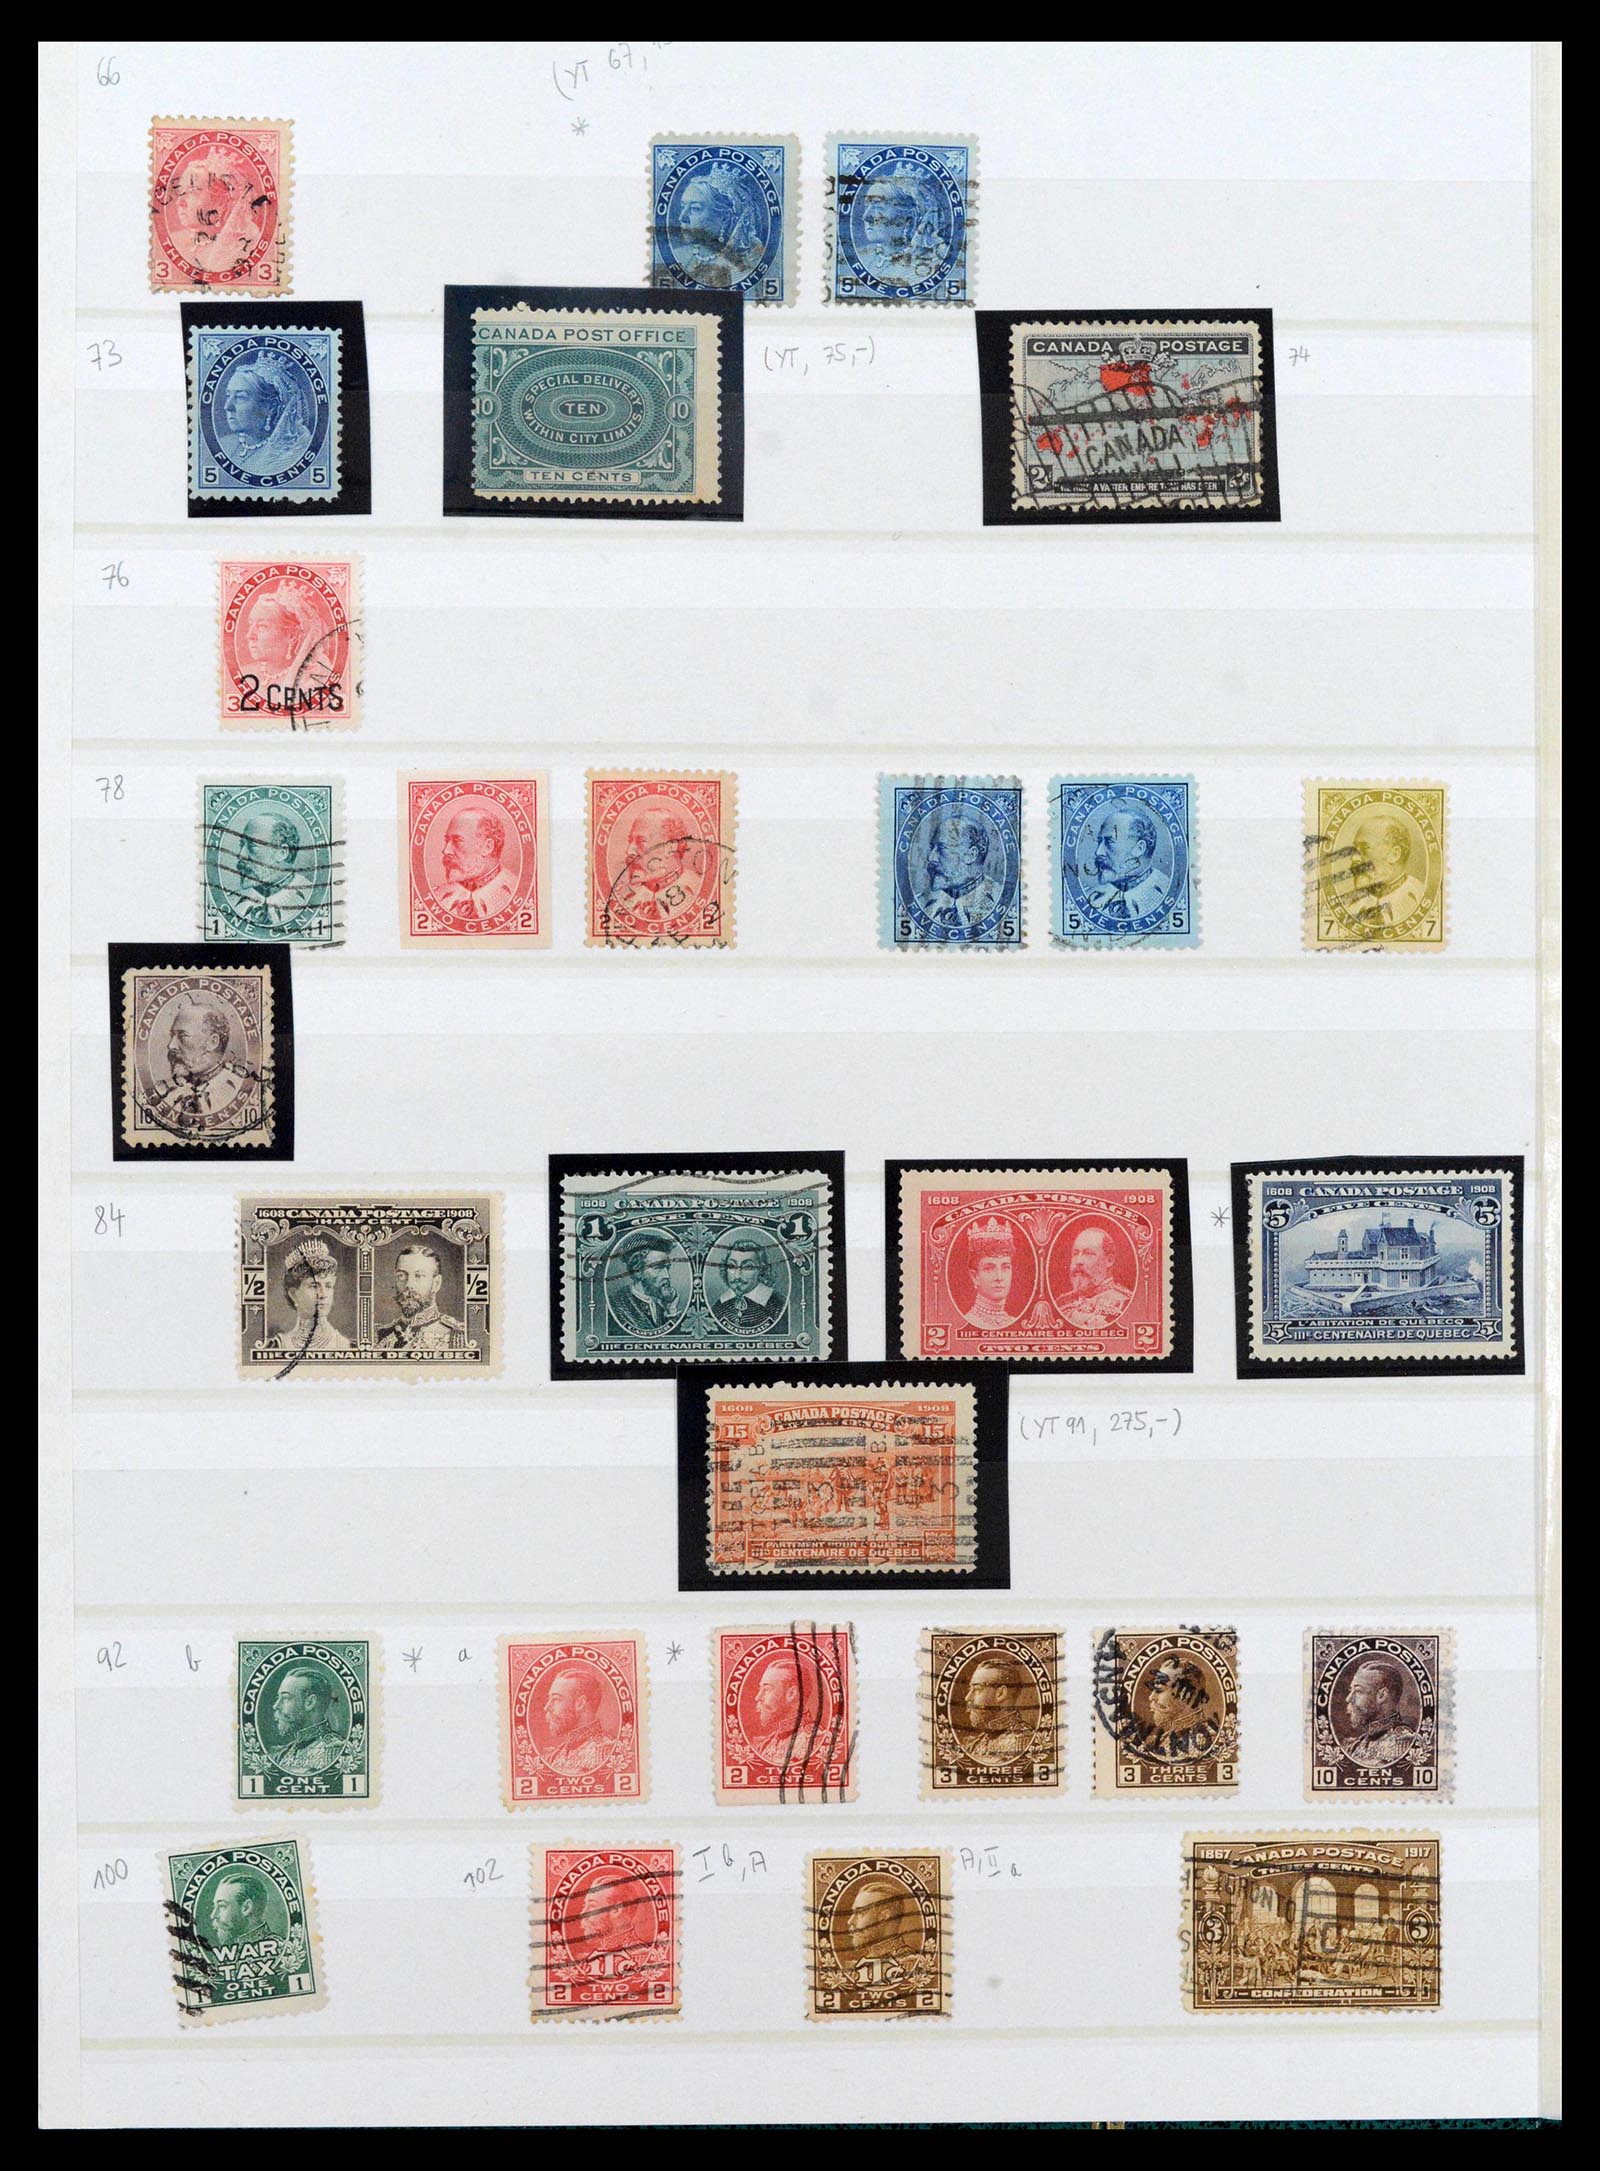 39199 0023 - Stamp collection 39199 Canada and provinces 1851-1970.